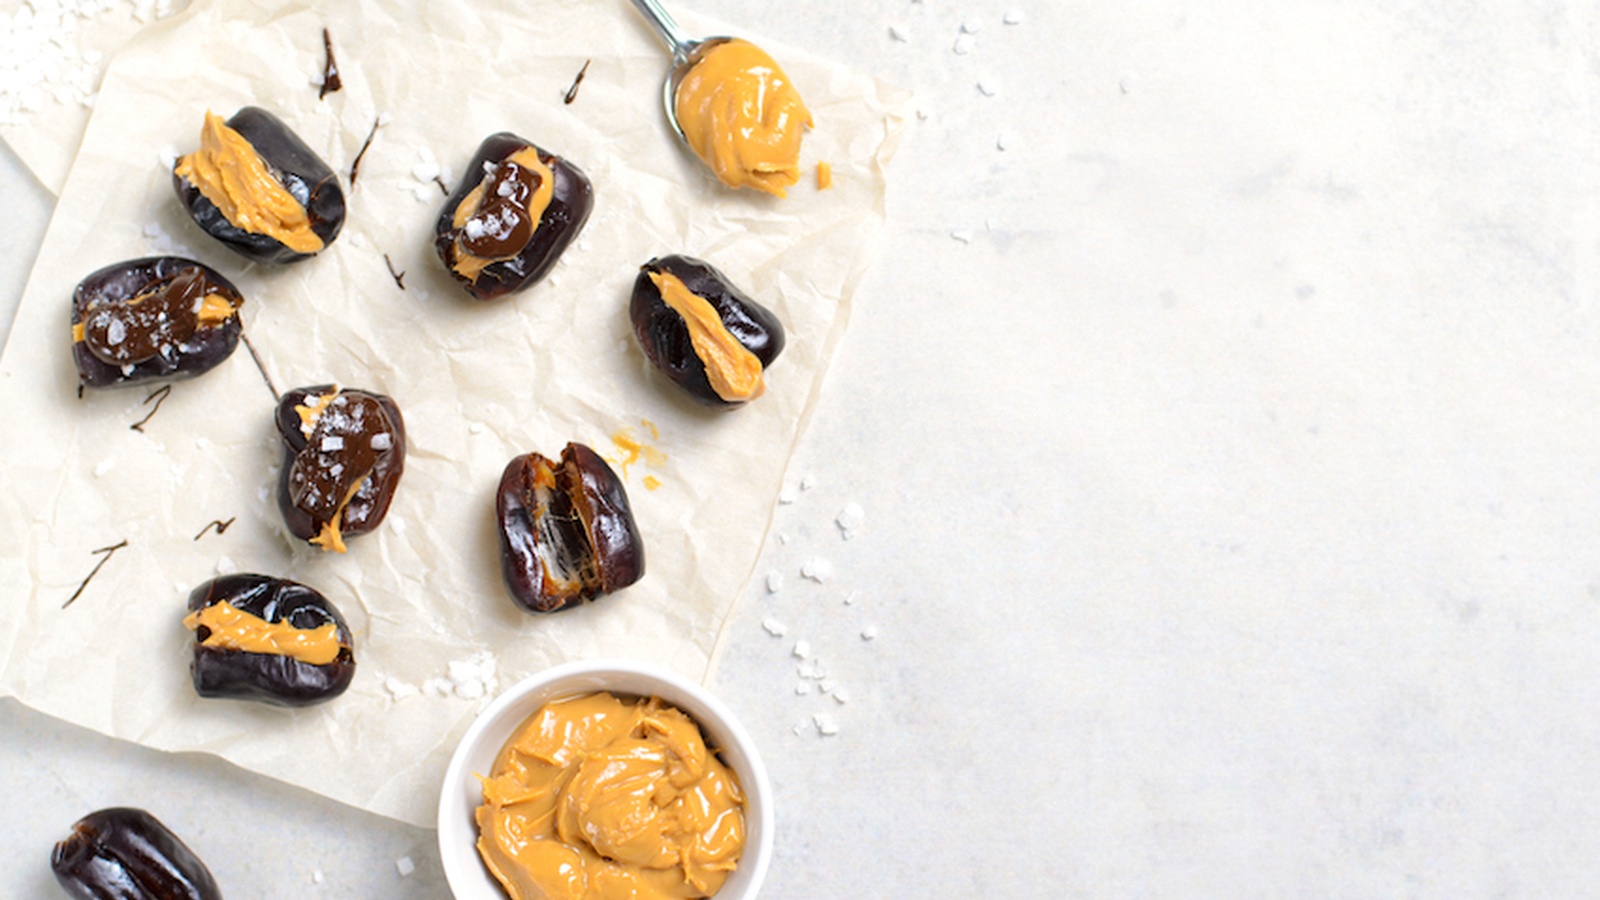 Simple Clean Snacks! 3 Ways to Make Stuffed Dates